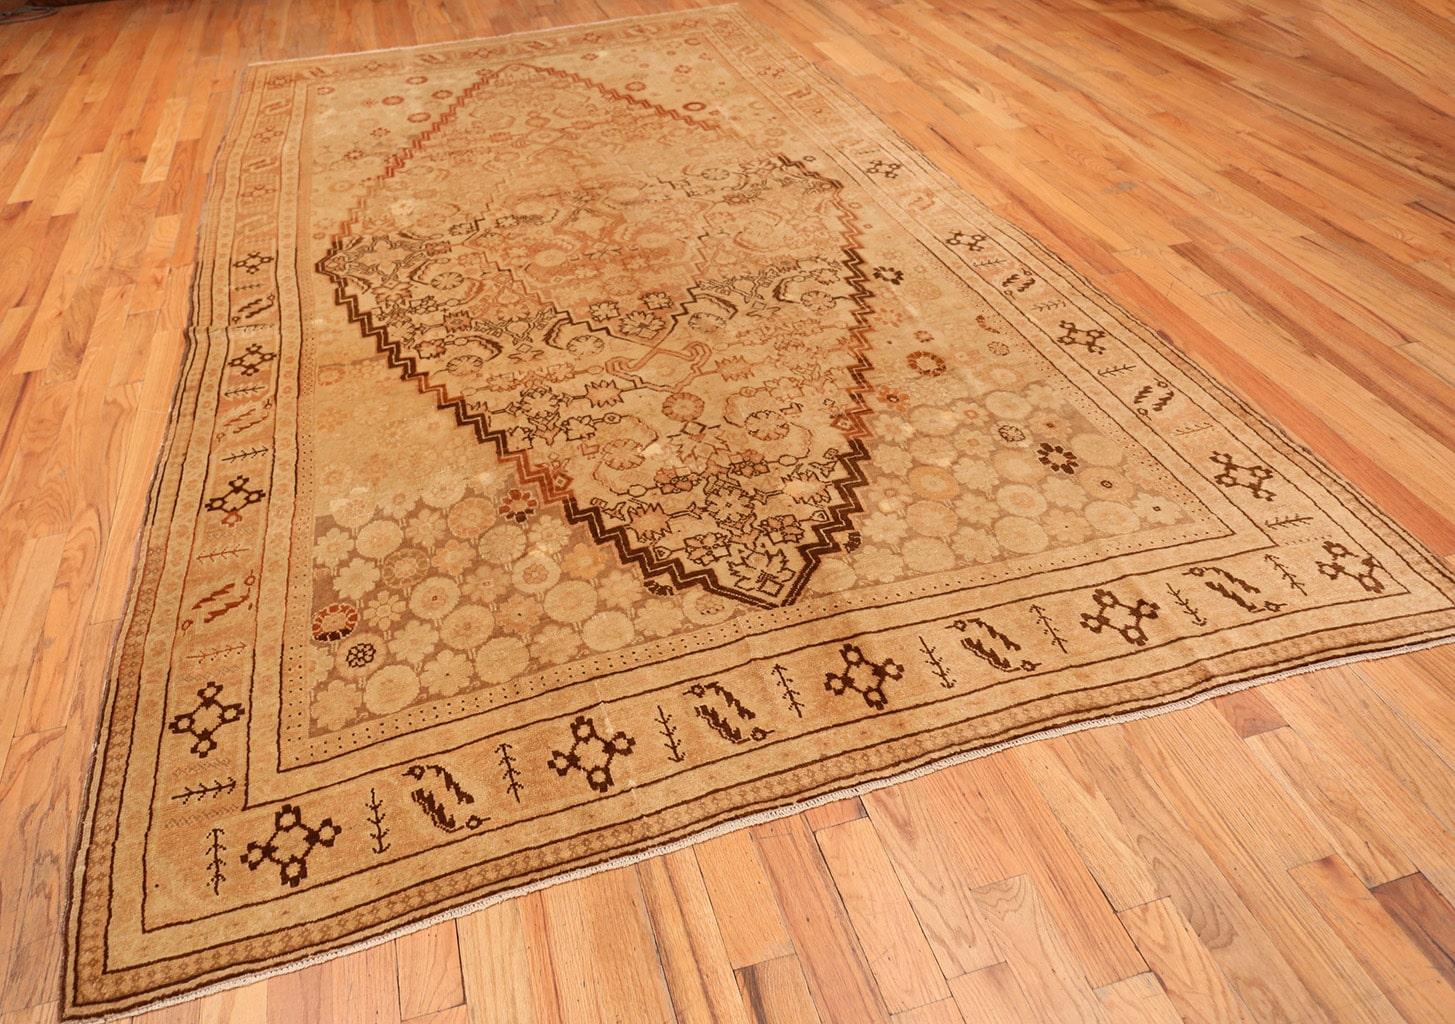 20th Century Antique Khotan Rug. Size: 7 ft x 12 ft 7 in (2.13 m x 3.84 m) For Sale